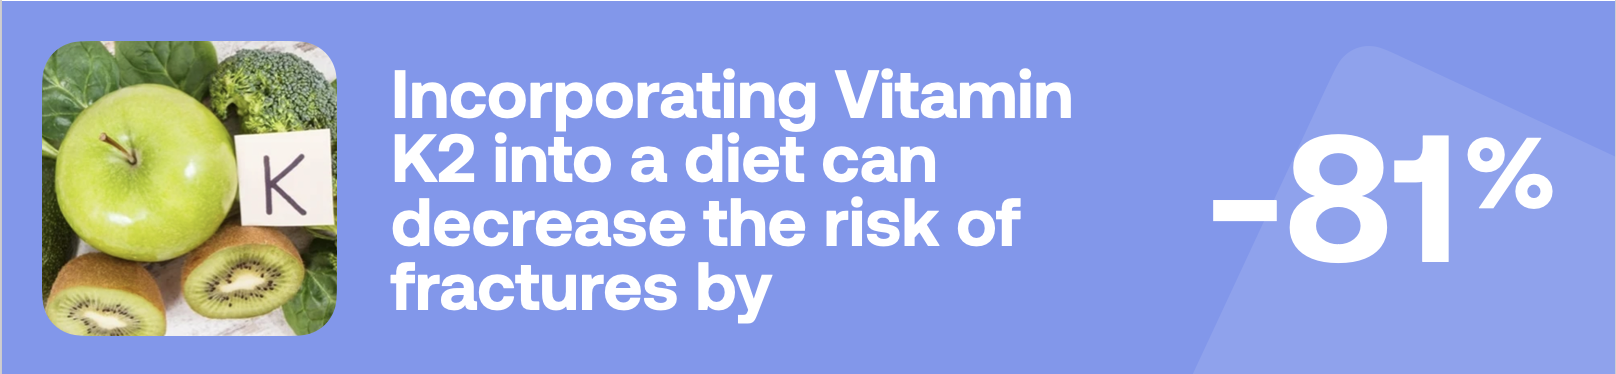 Incorporating Vitamin K2 into a diet can decrease the risk of fractures by -81%